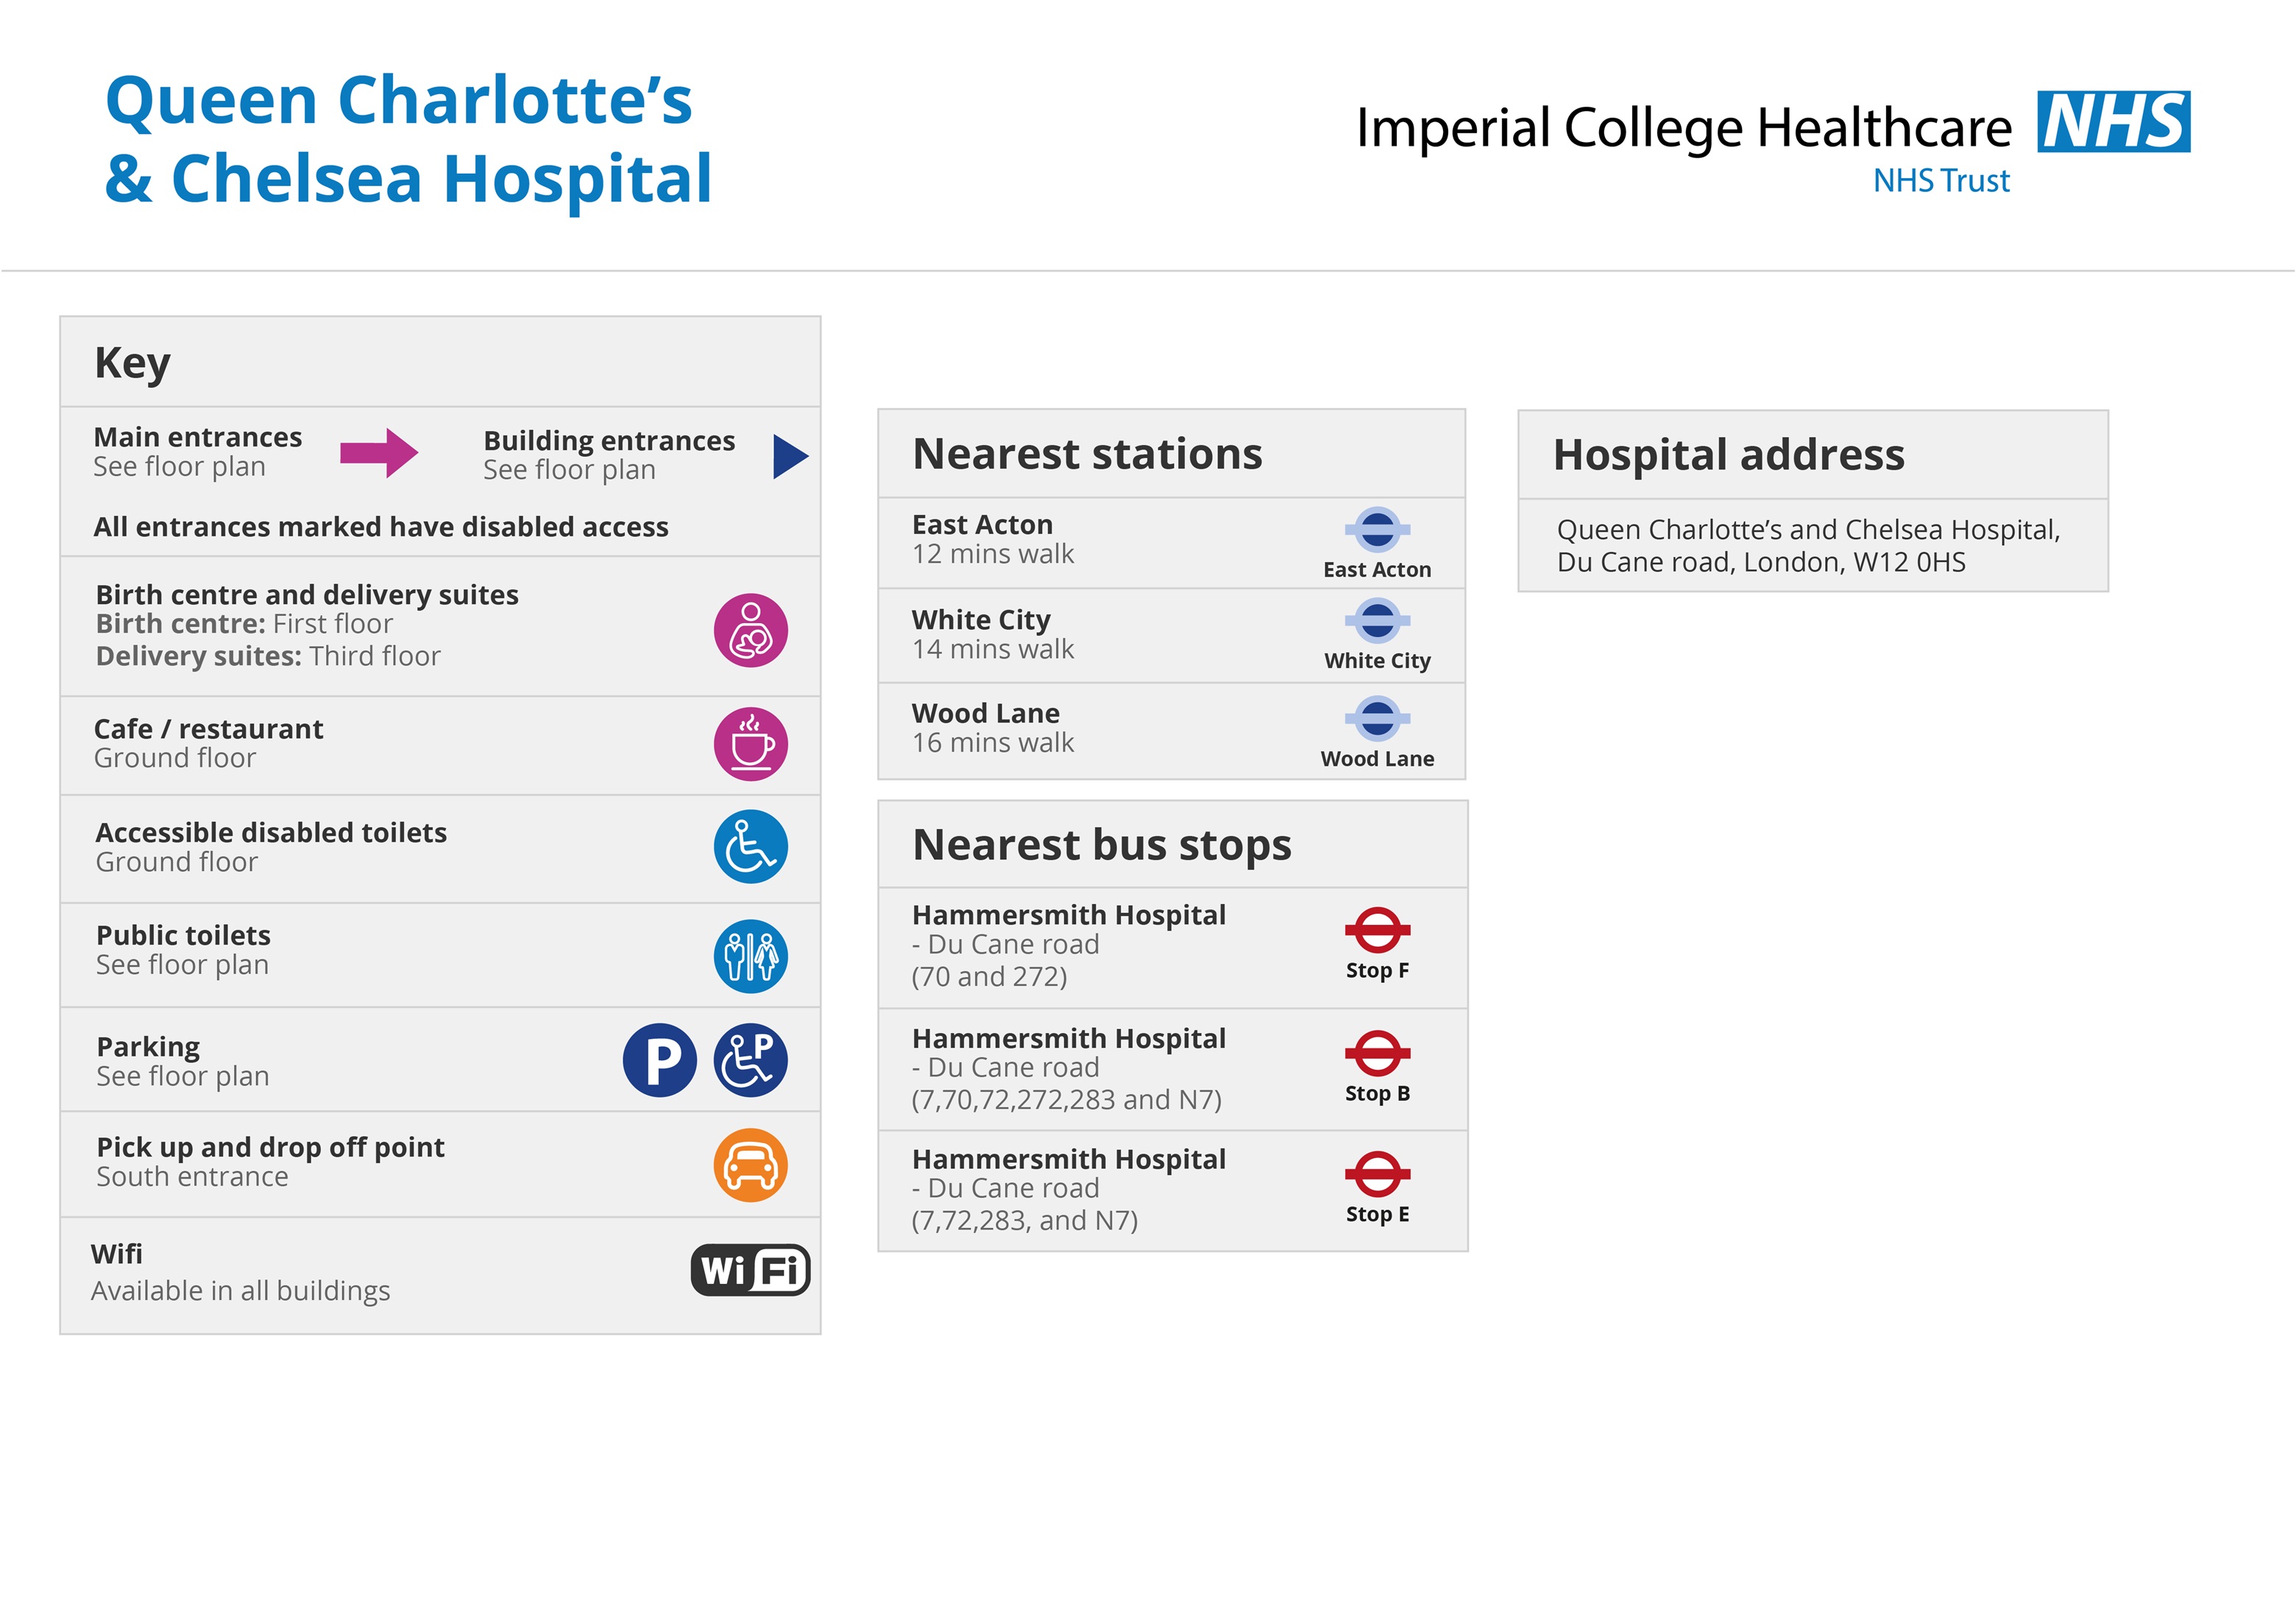 Queen Charlotte's and Chelsea Hospital site map